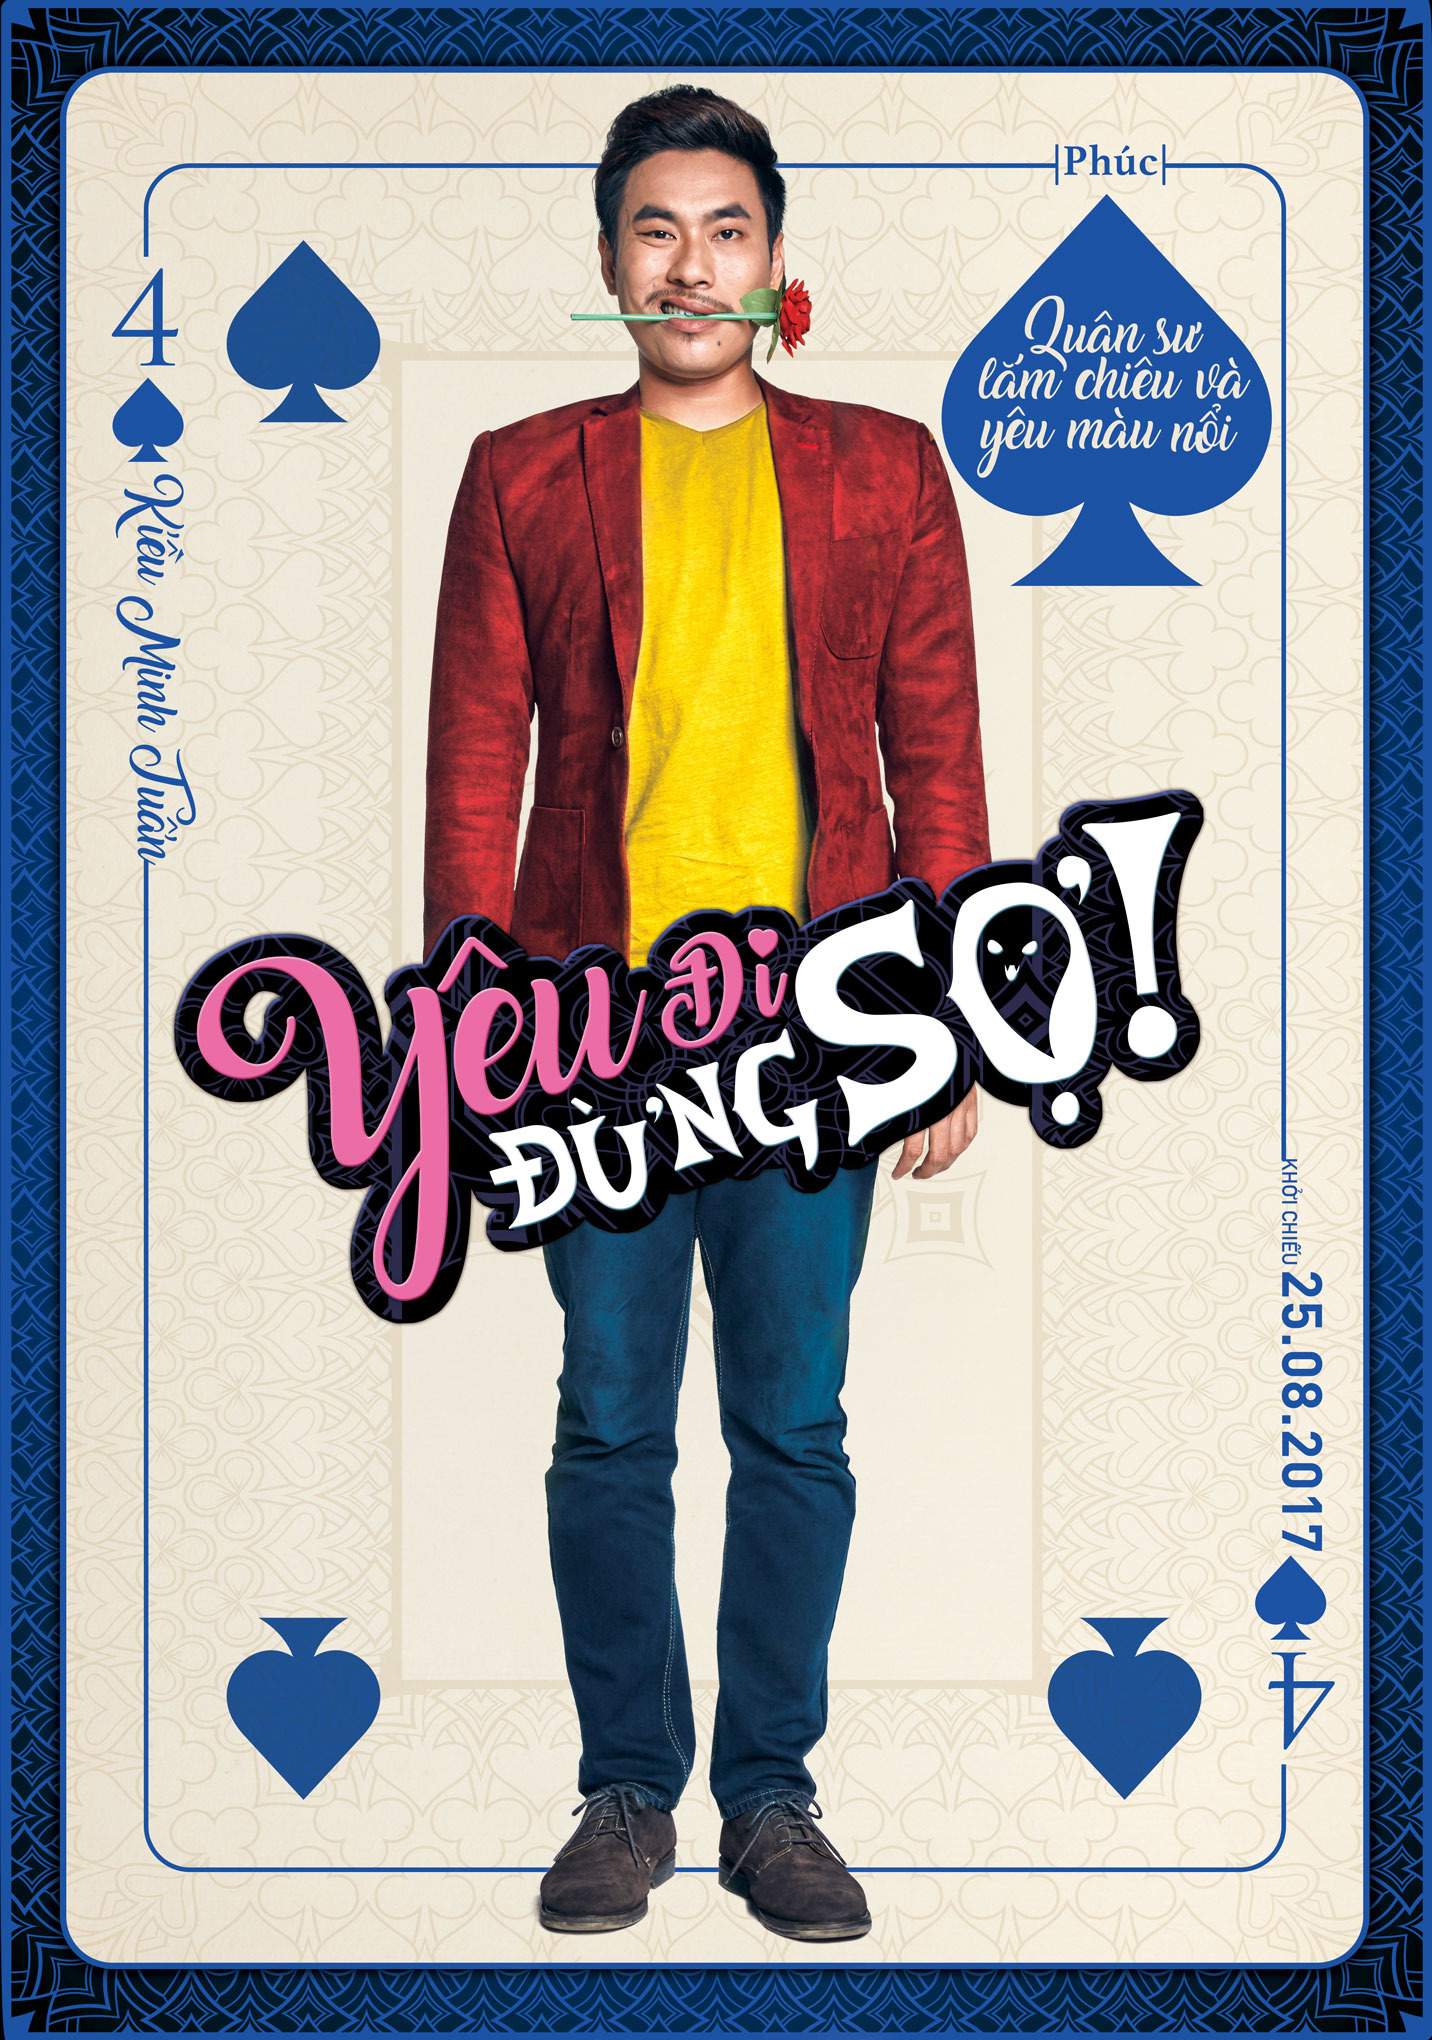 Mega Sized Movie Poster Image for Yeu Di, Dung So! (#4 of 7)